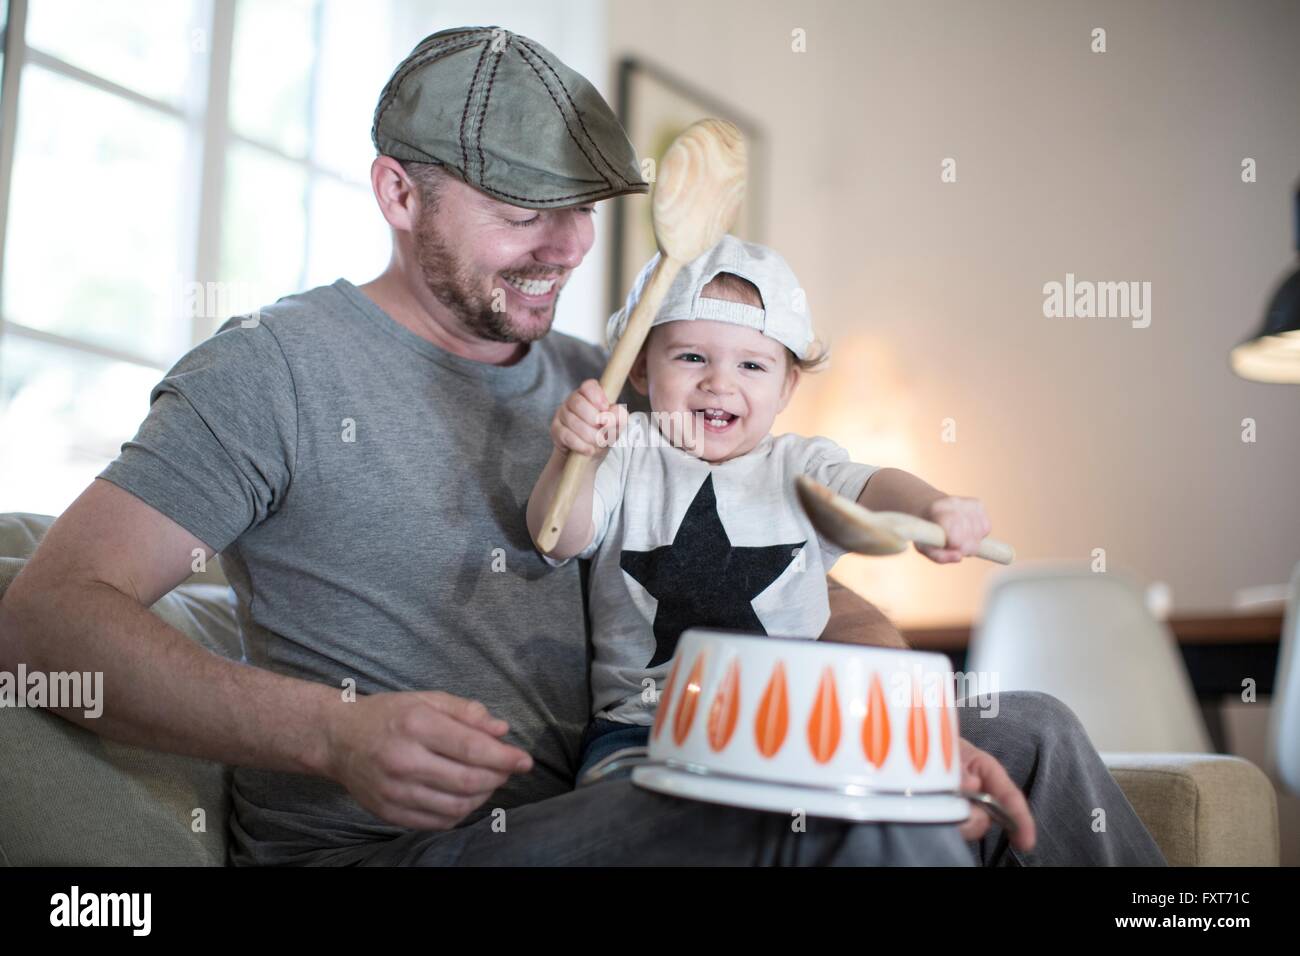 Baby boy on fathers lap playing drums on upside down saucepan Stock Photo